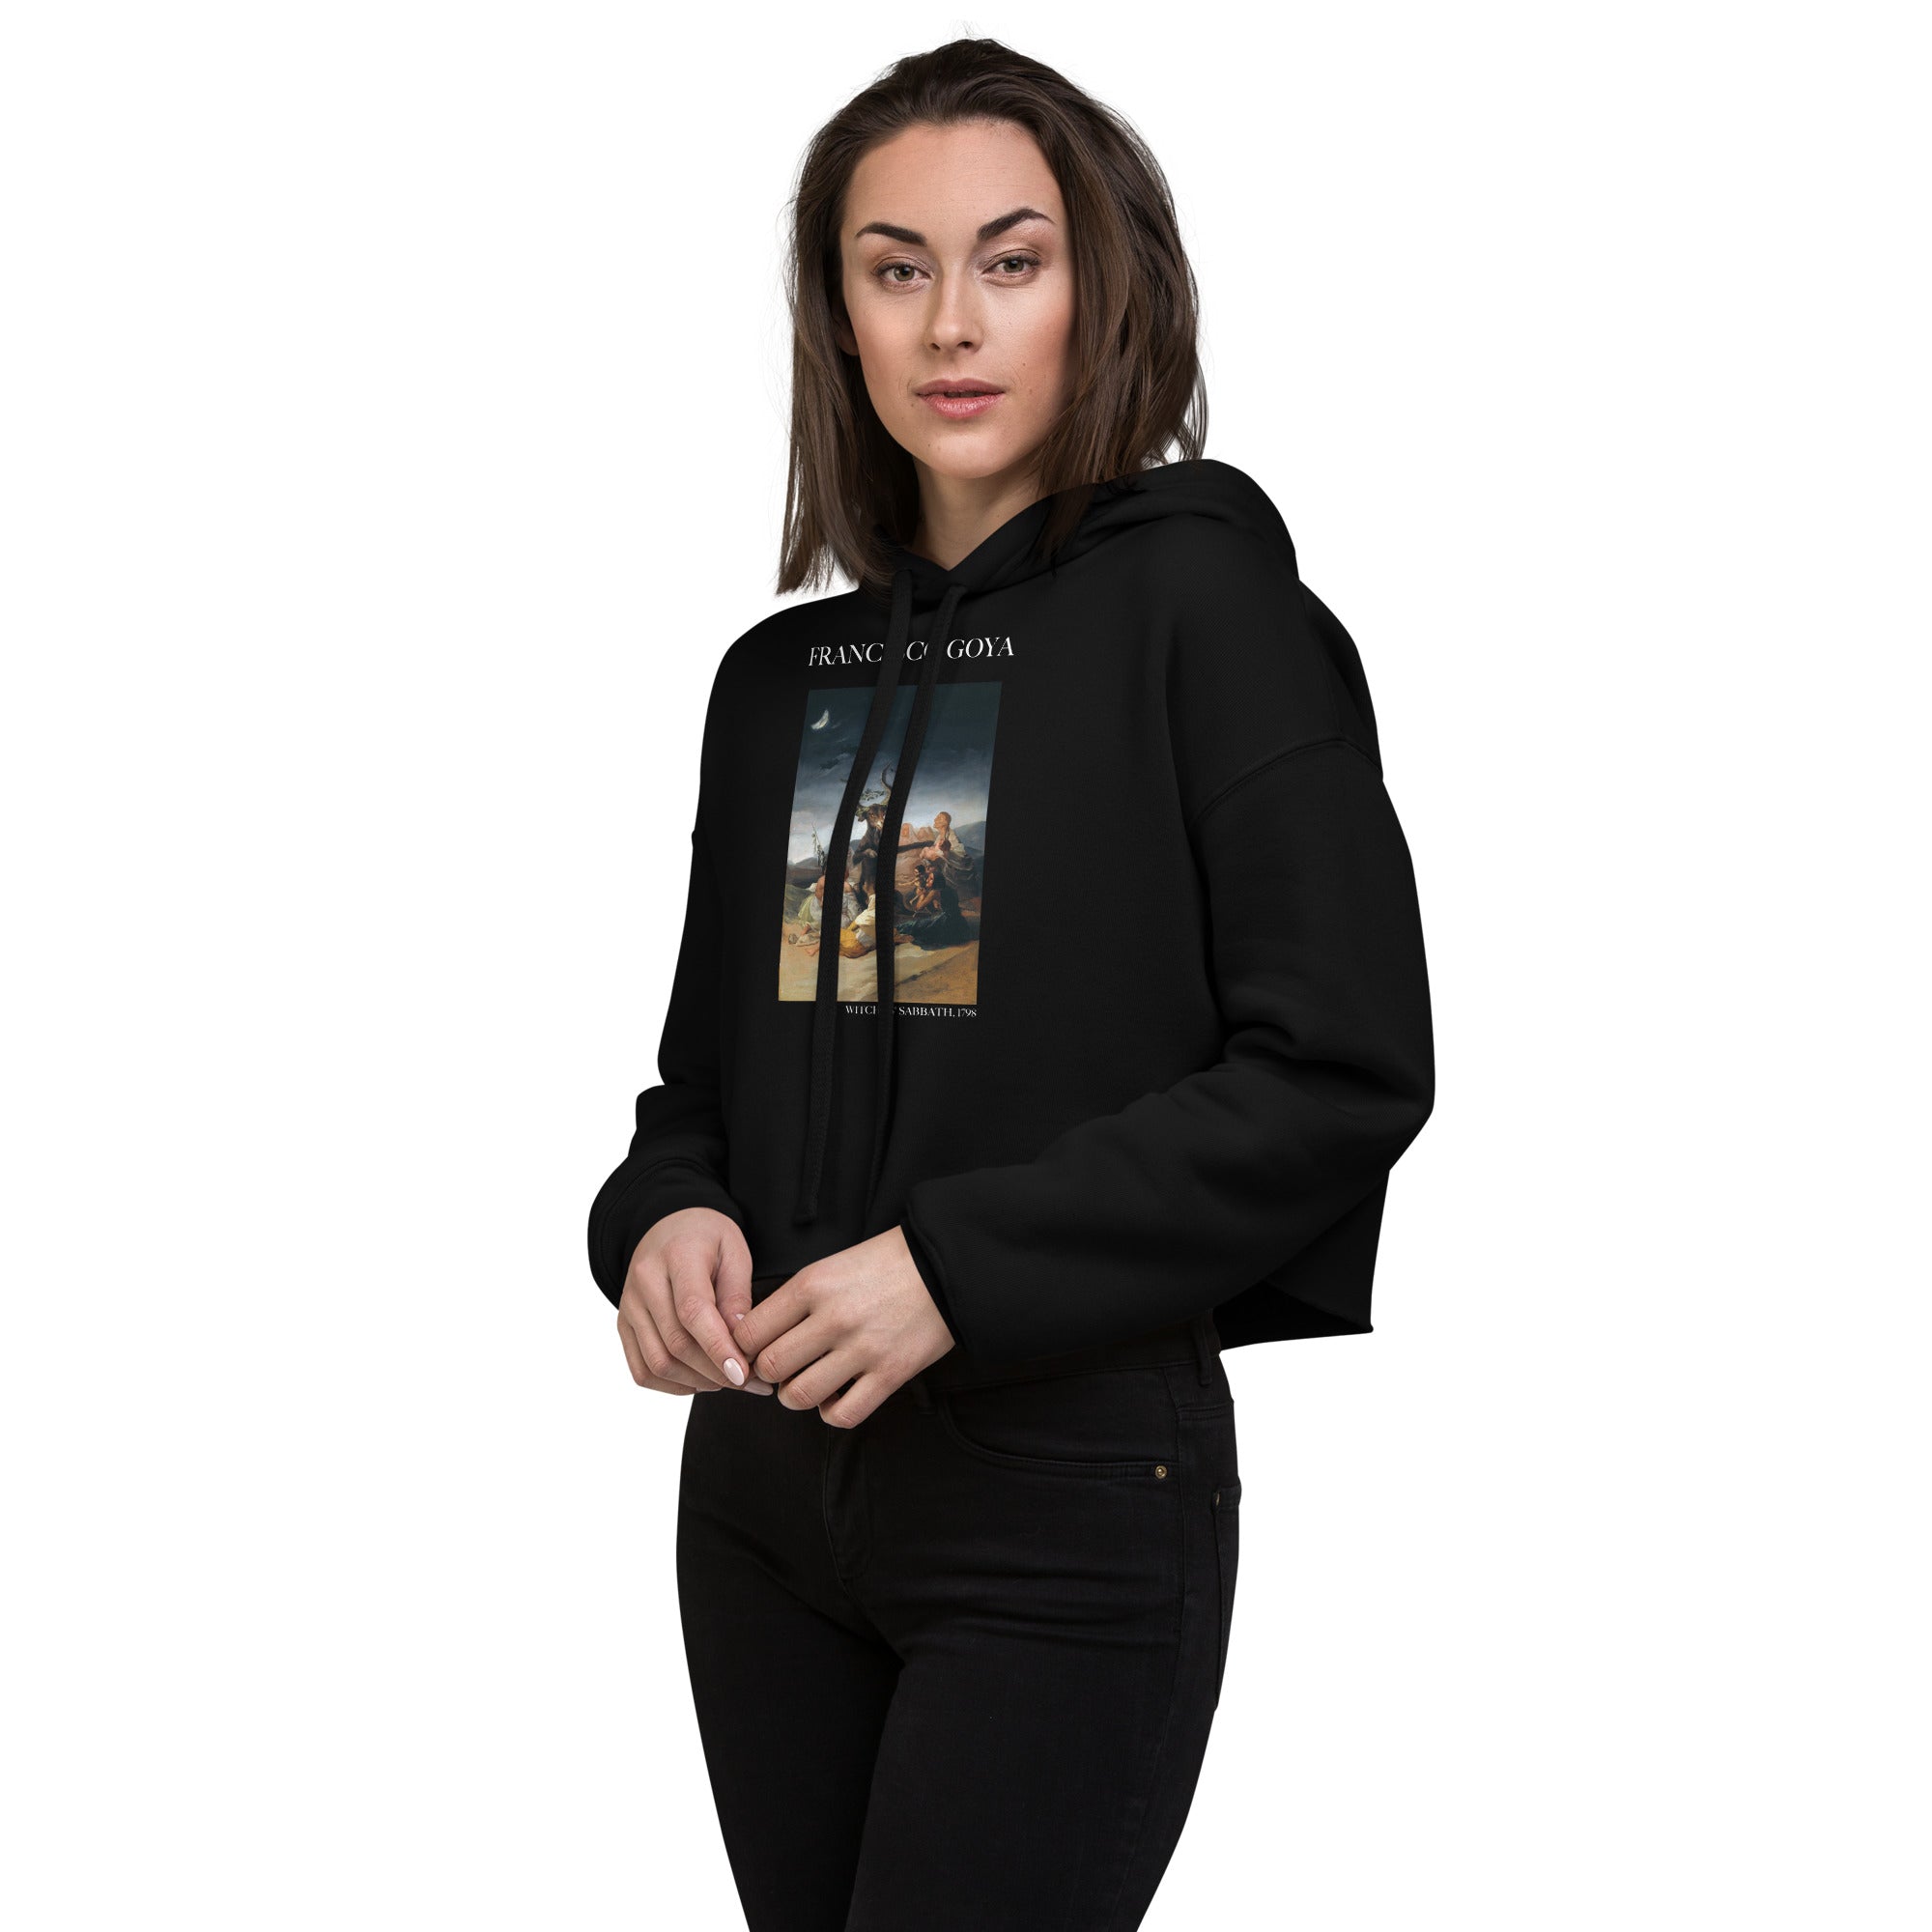 Francisco Goya 'Witches' Sabbath' Famous Painting Cropped Hoodie | Premium Art Cropped Hoodie